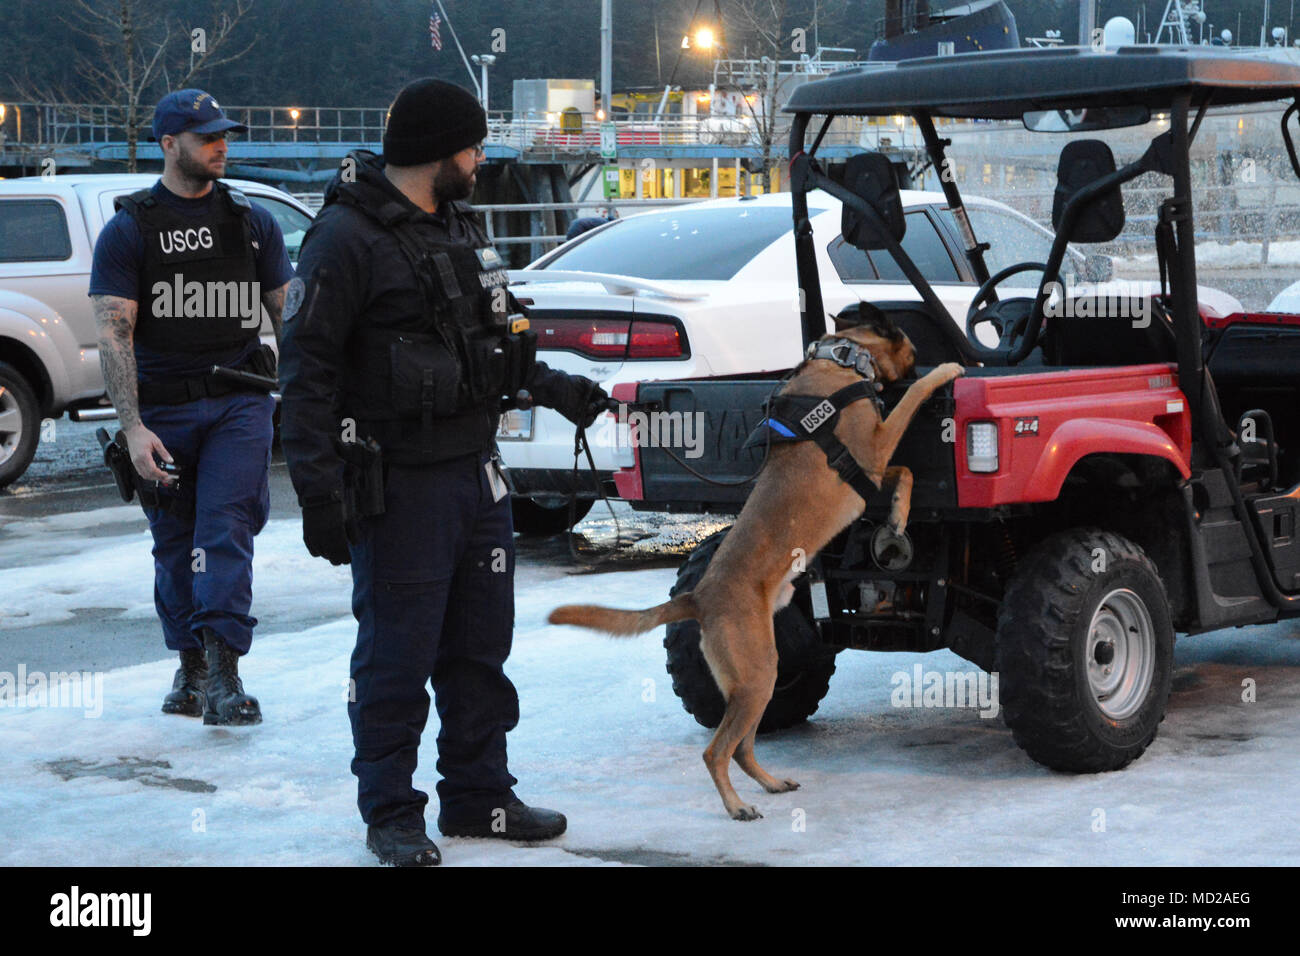 Canine Ricky and his handler Petty Officer 1st Class Jordan Brosowsky, a member of Coast Guard Maritime Safety and Security Team San Francisco (91105), conducts a sweep of the Alaska Marine Highway System ferry terminal parking lot in Juneau, Alaska, March 12, 2018. The Coast Guard, Alaska State Troopers and Juneau Police Department partnered together during the law enforcement operation to detect and deter illegal activity on Alaska's waterways. U.S. Coast Guard photo illustration by Lt. Brian Dykens. Stock Photo